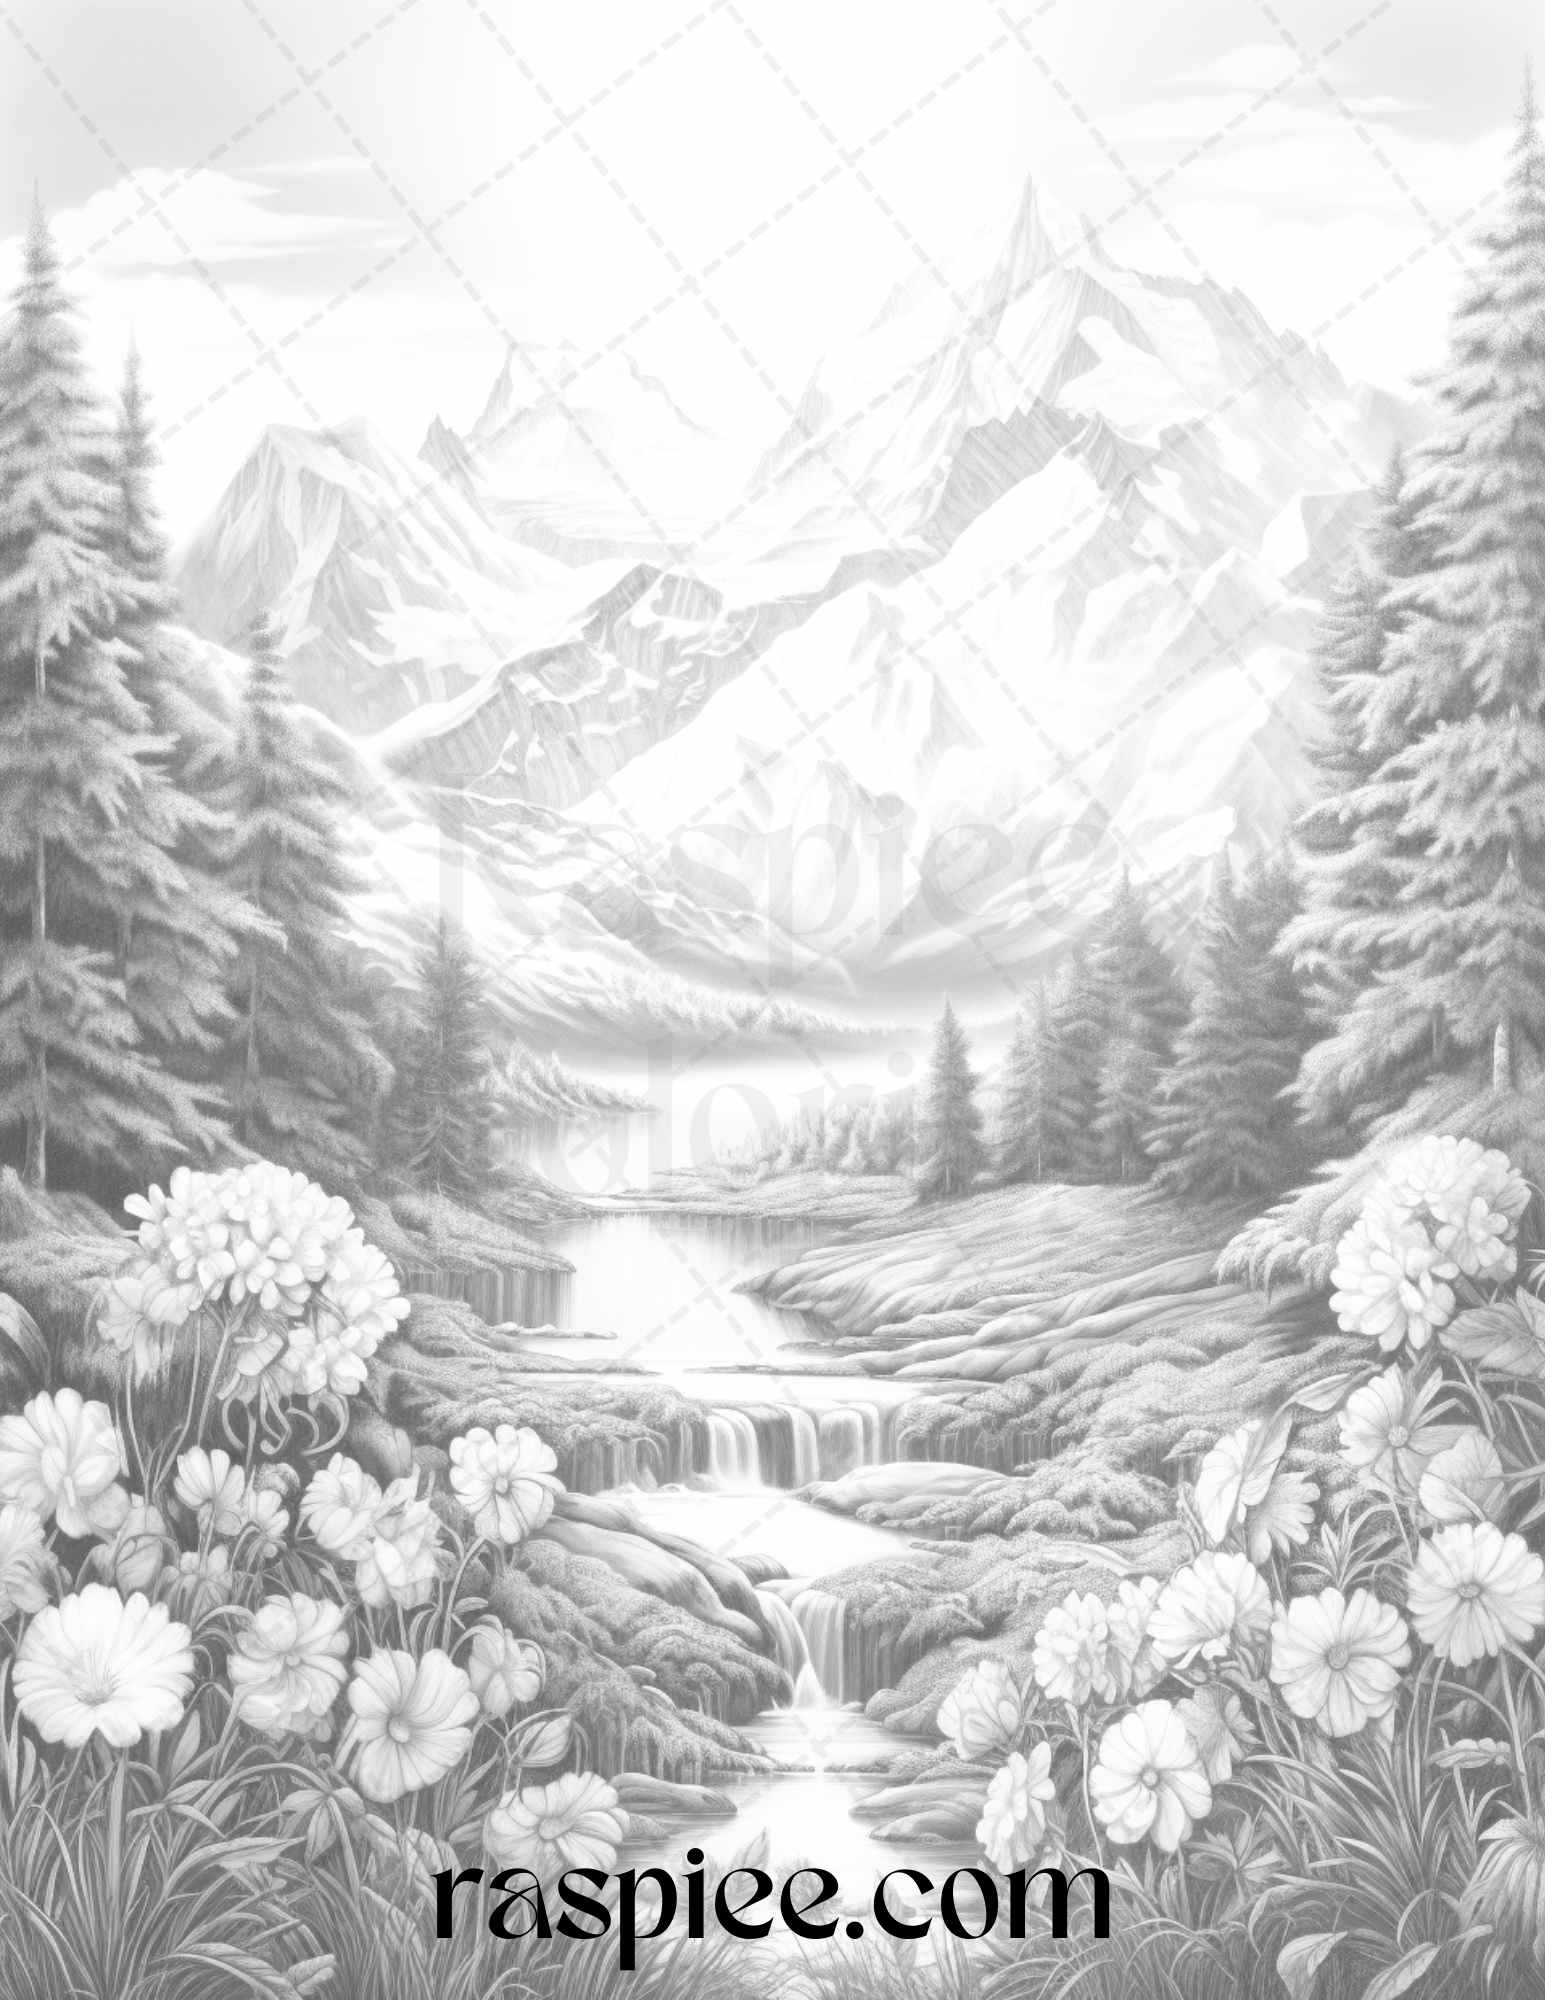 Serene Mountain Flower Landscape Coloring Page for Adults, Grayscale Mountain Flower Illustration for Stress Relief Coloring